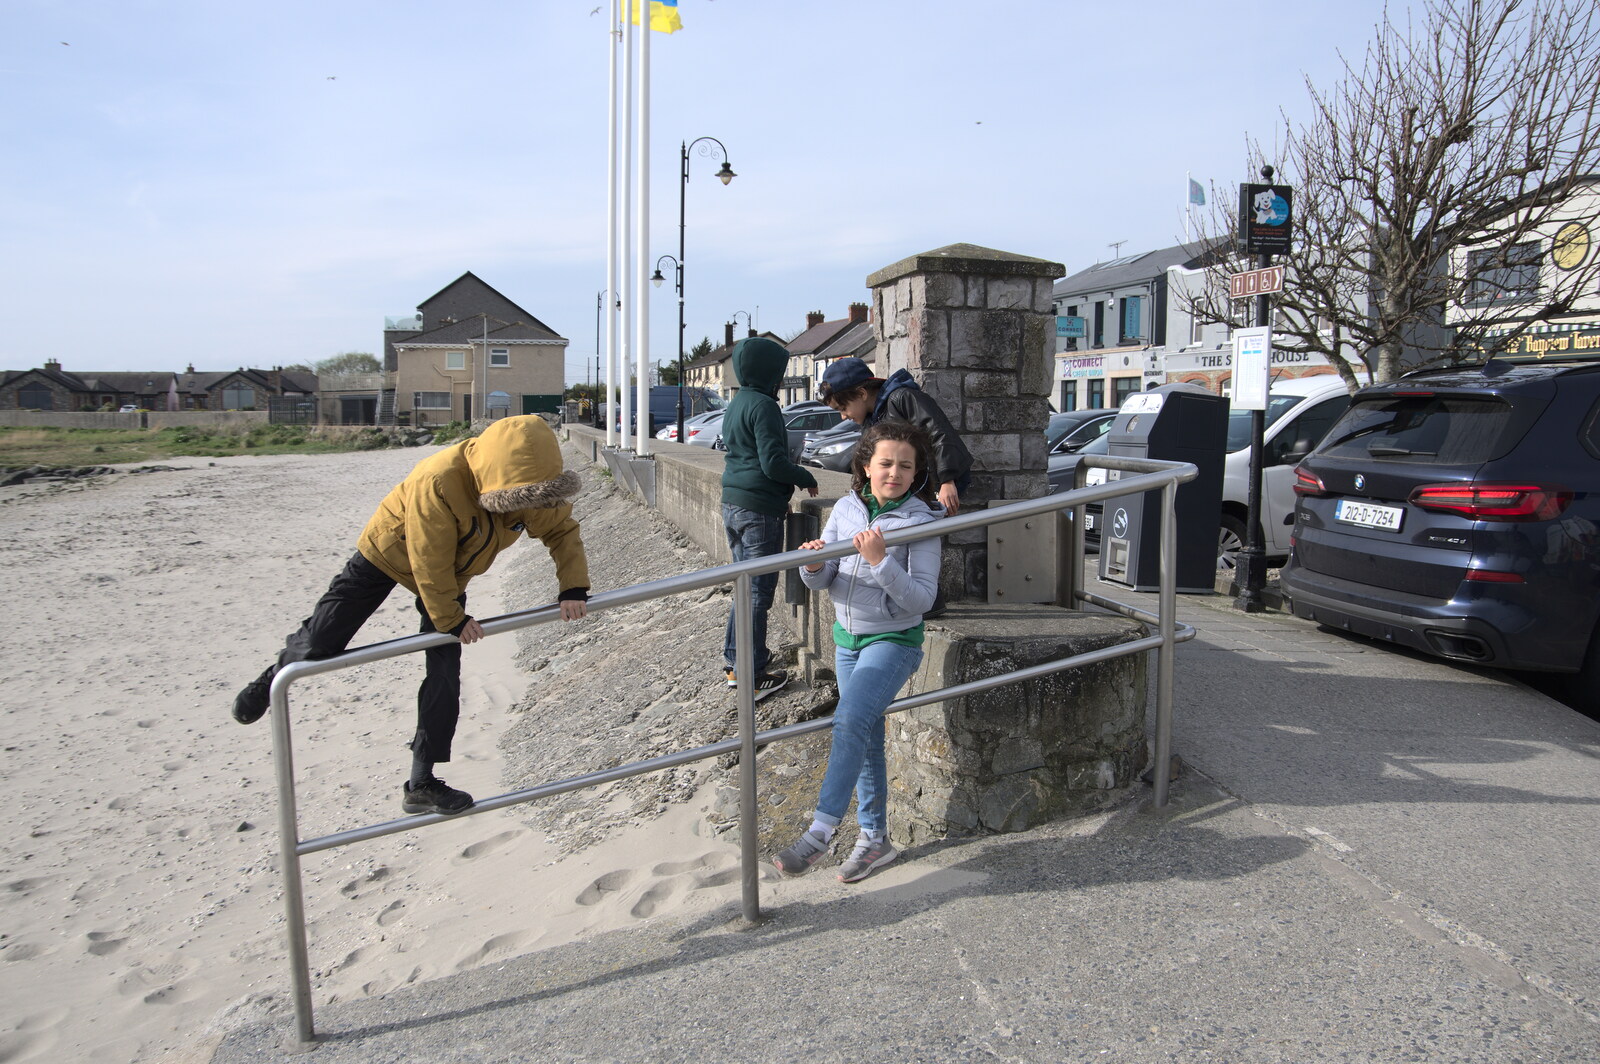 Blackrock North and South, Louth and County Dublin, Ireland - 23rd April 2022: Harry climbs around